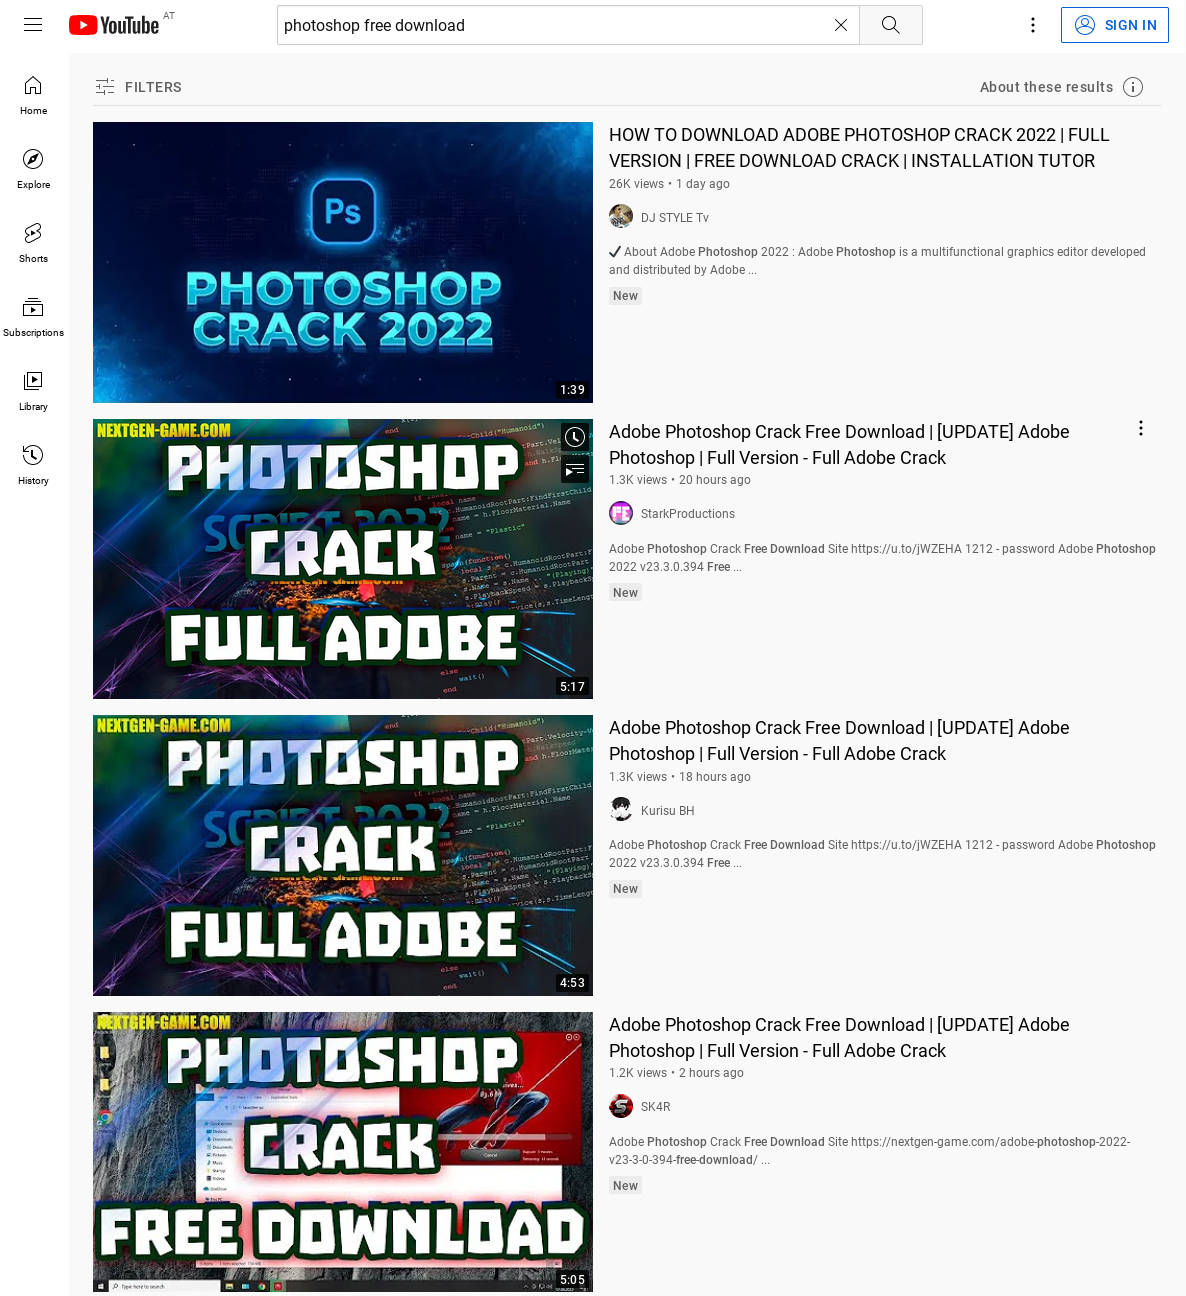 Results for the search “photoshop free download” on YouTube as of August 18, 2022 (infection chain example).
